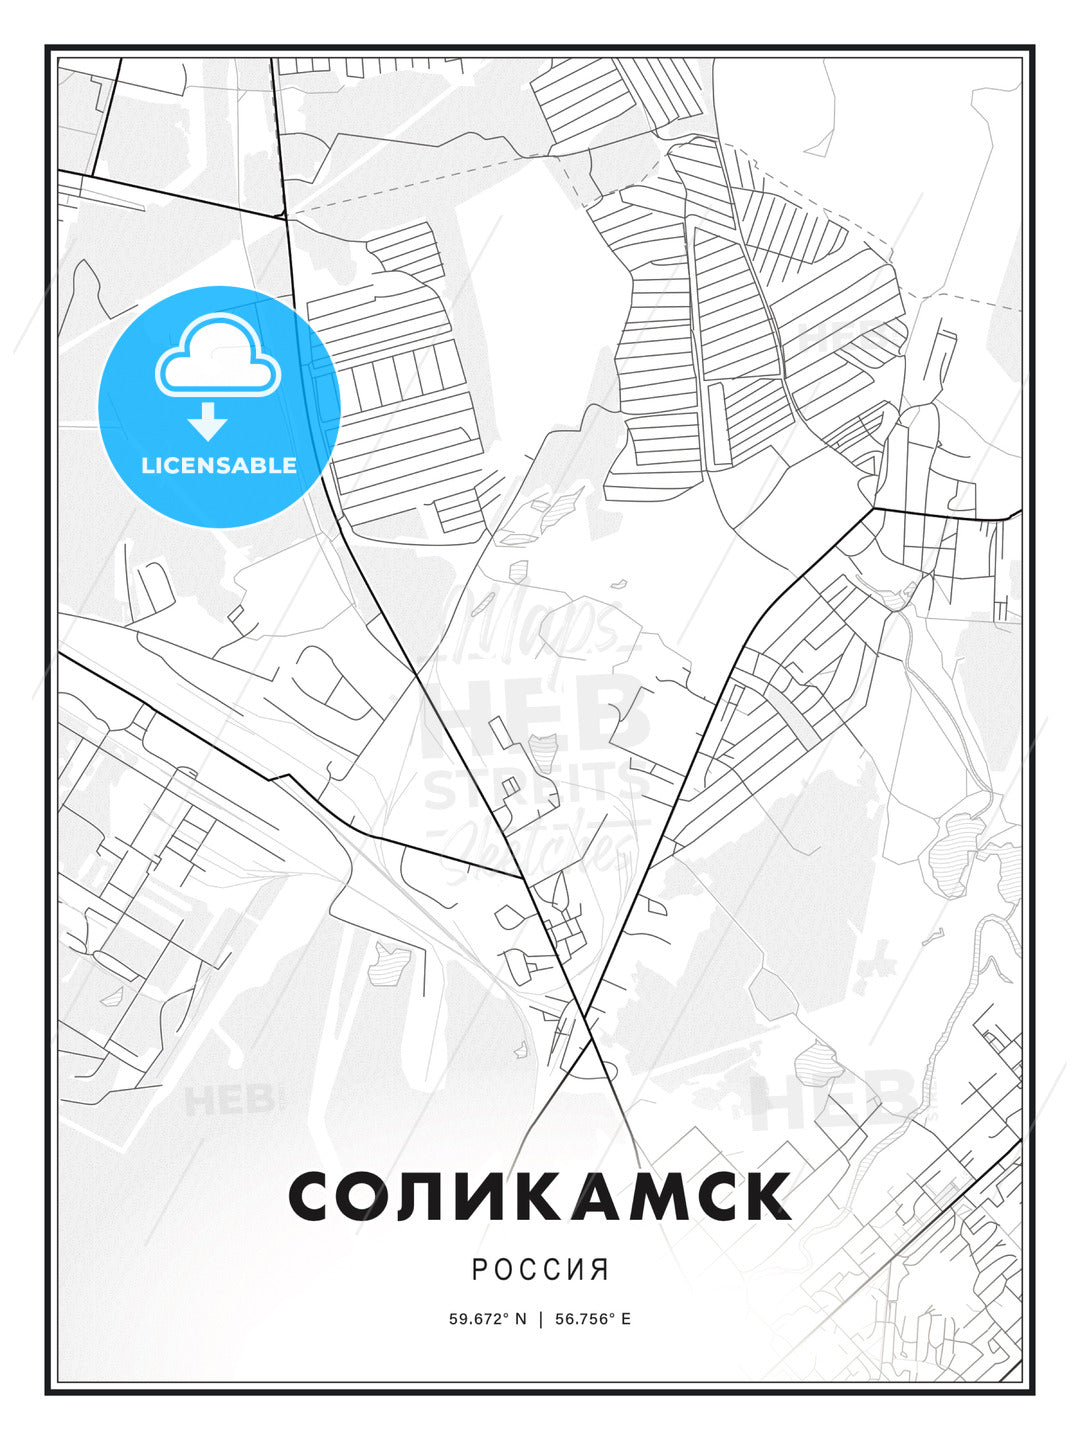 СОЛИКАМСК / Solikamsk, Russia, Modern Print Template in Various Formats - HEBSTREITS Sketches